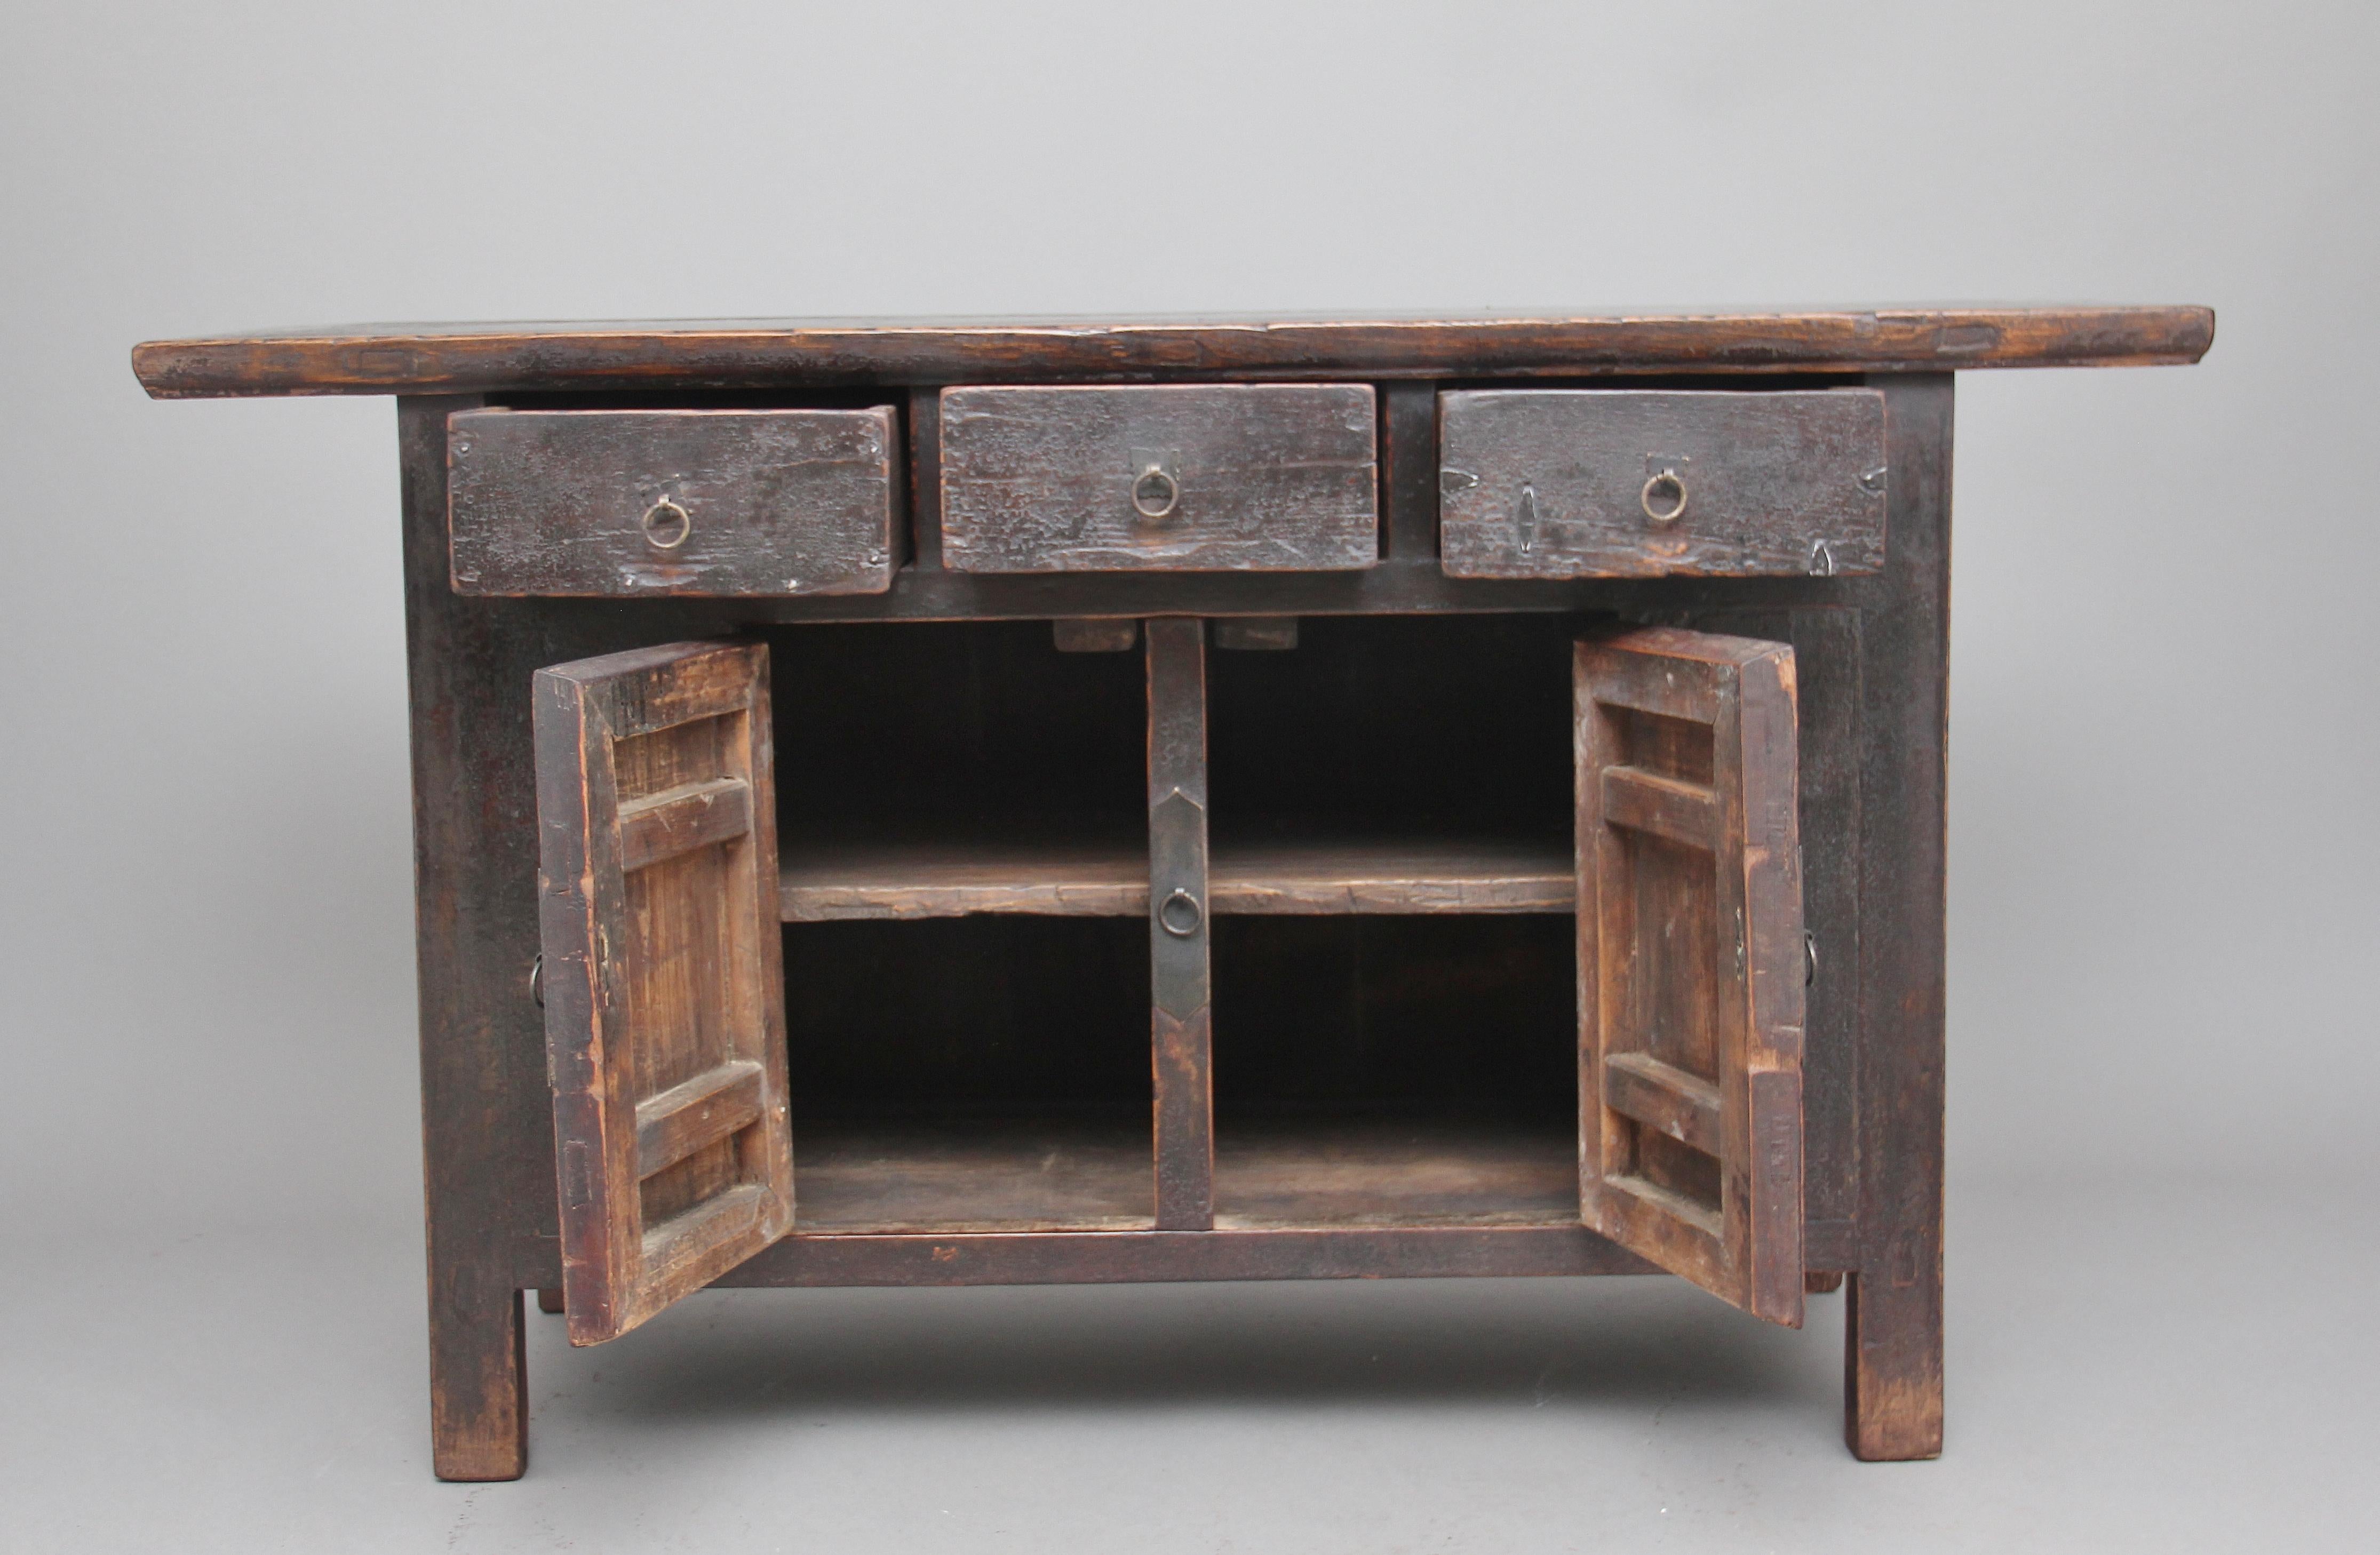 19th century Chinese rustic elm dresser in the traditional shape and style, the cabinet having three drawers with original ring pull handles above a two-door cupboard opening to reveal a single fixed shelf inside standing on square legs, circa